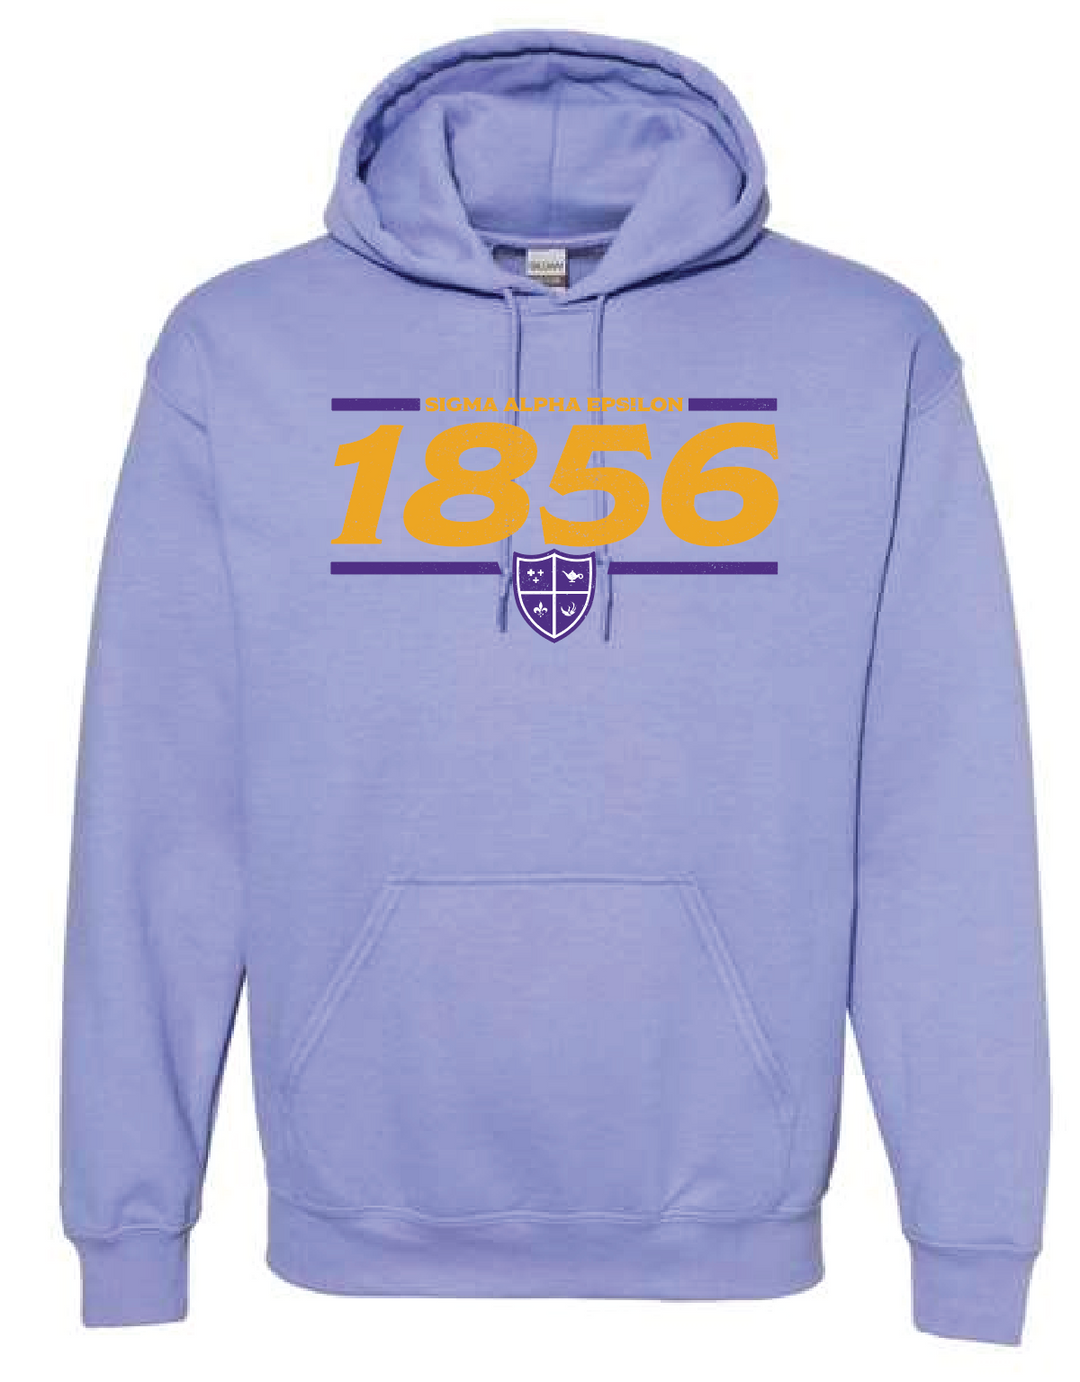 SAE 1856 Hoodie in Violet - The Sigma Alpha Epsilon Store